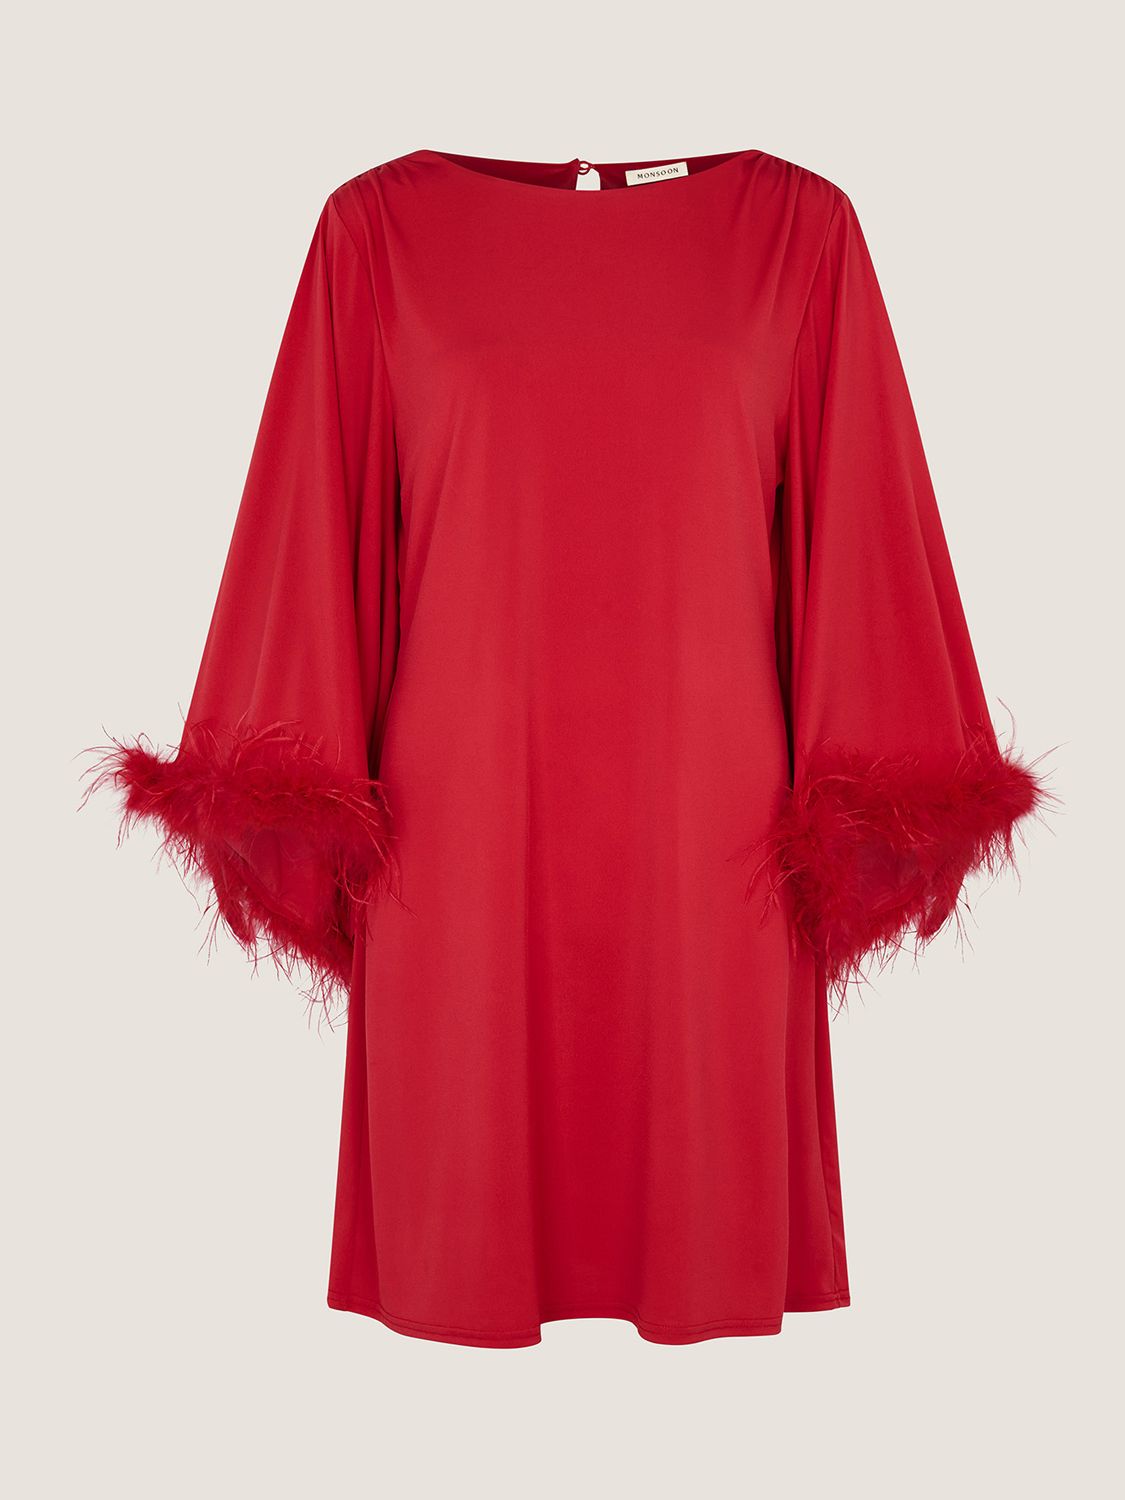 Monsoon Feather Trim Tunic Dress, Red, 8